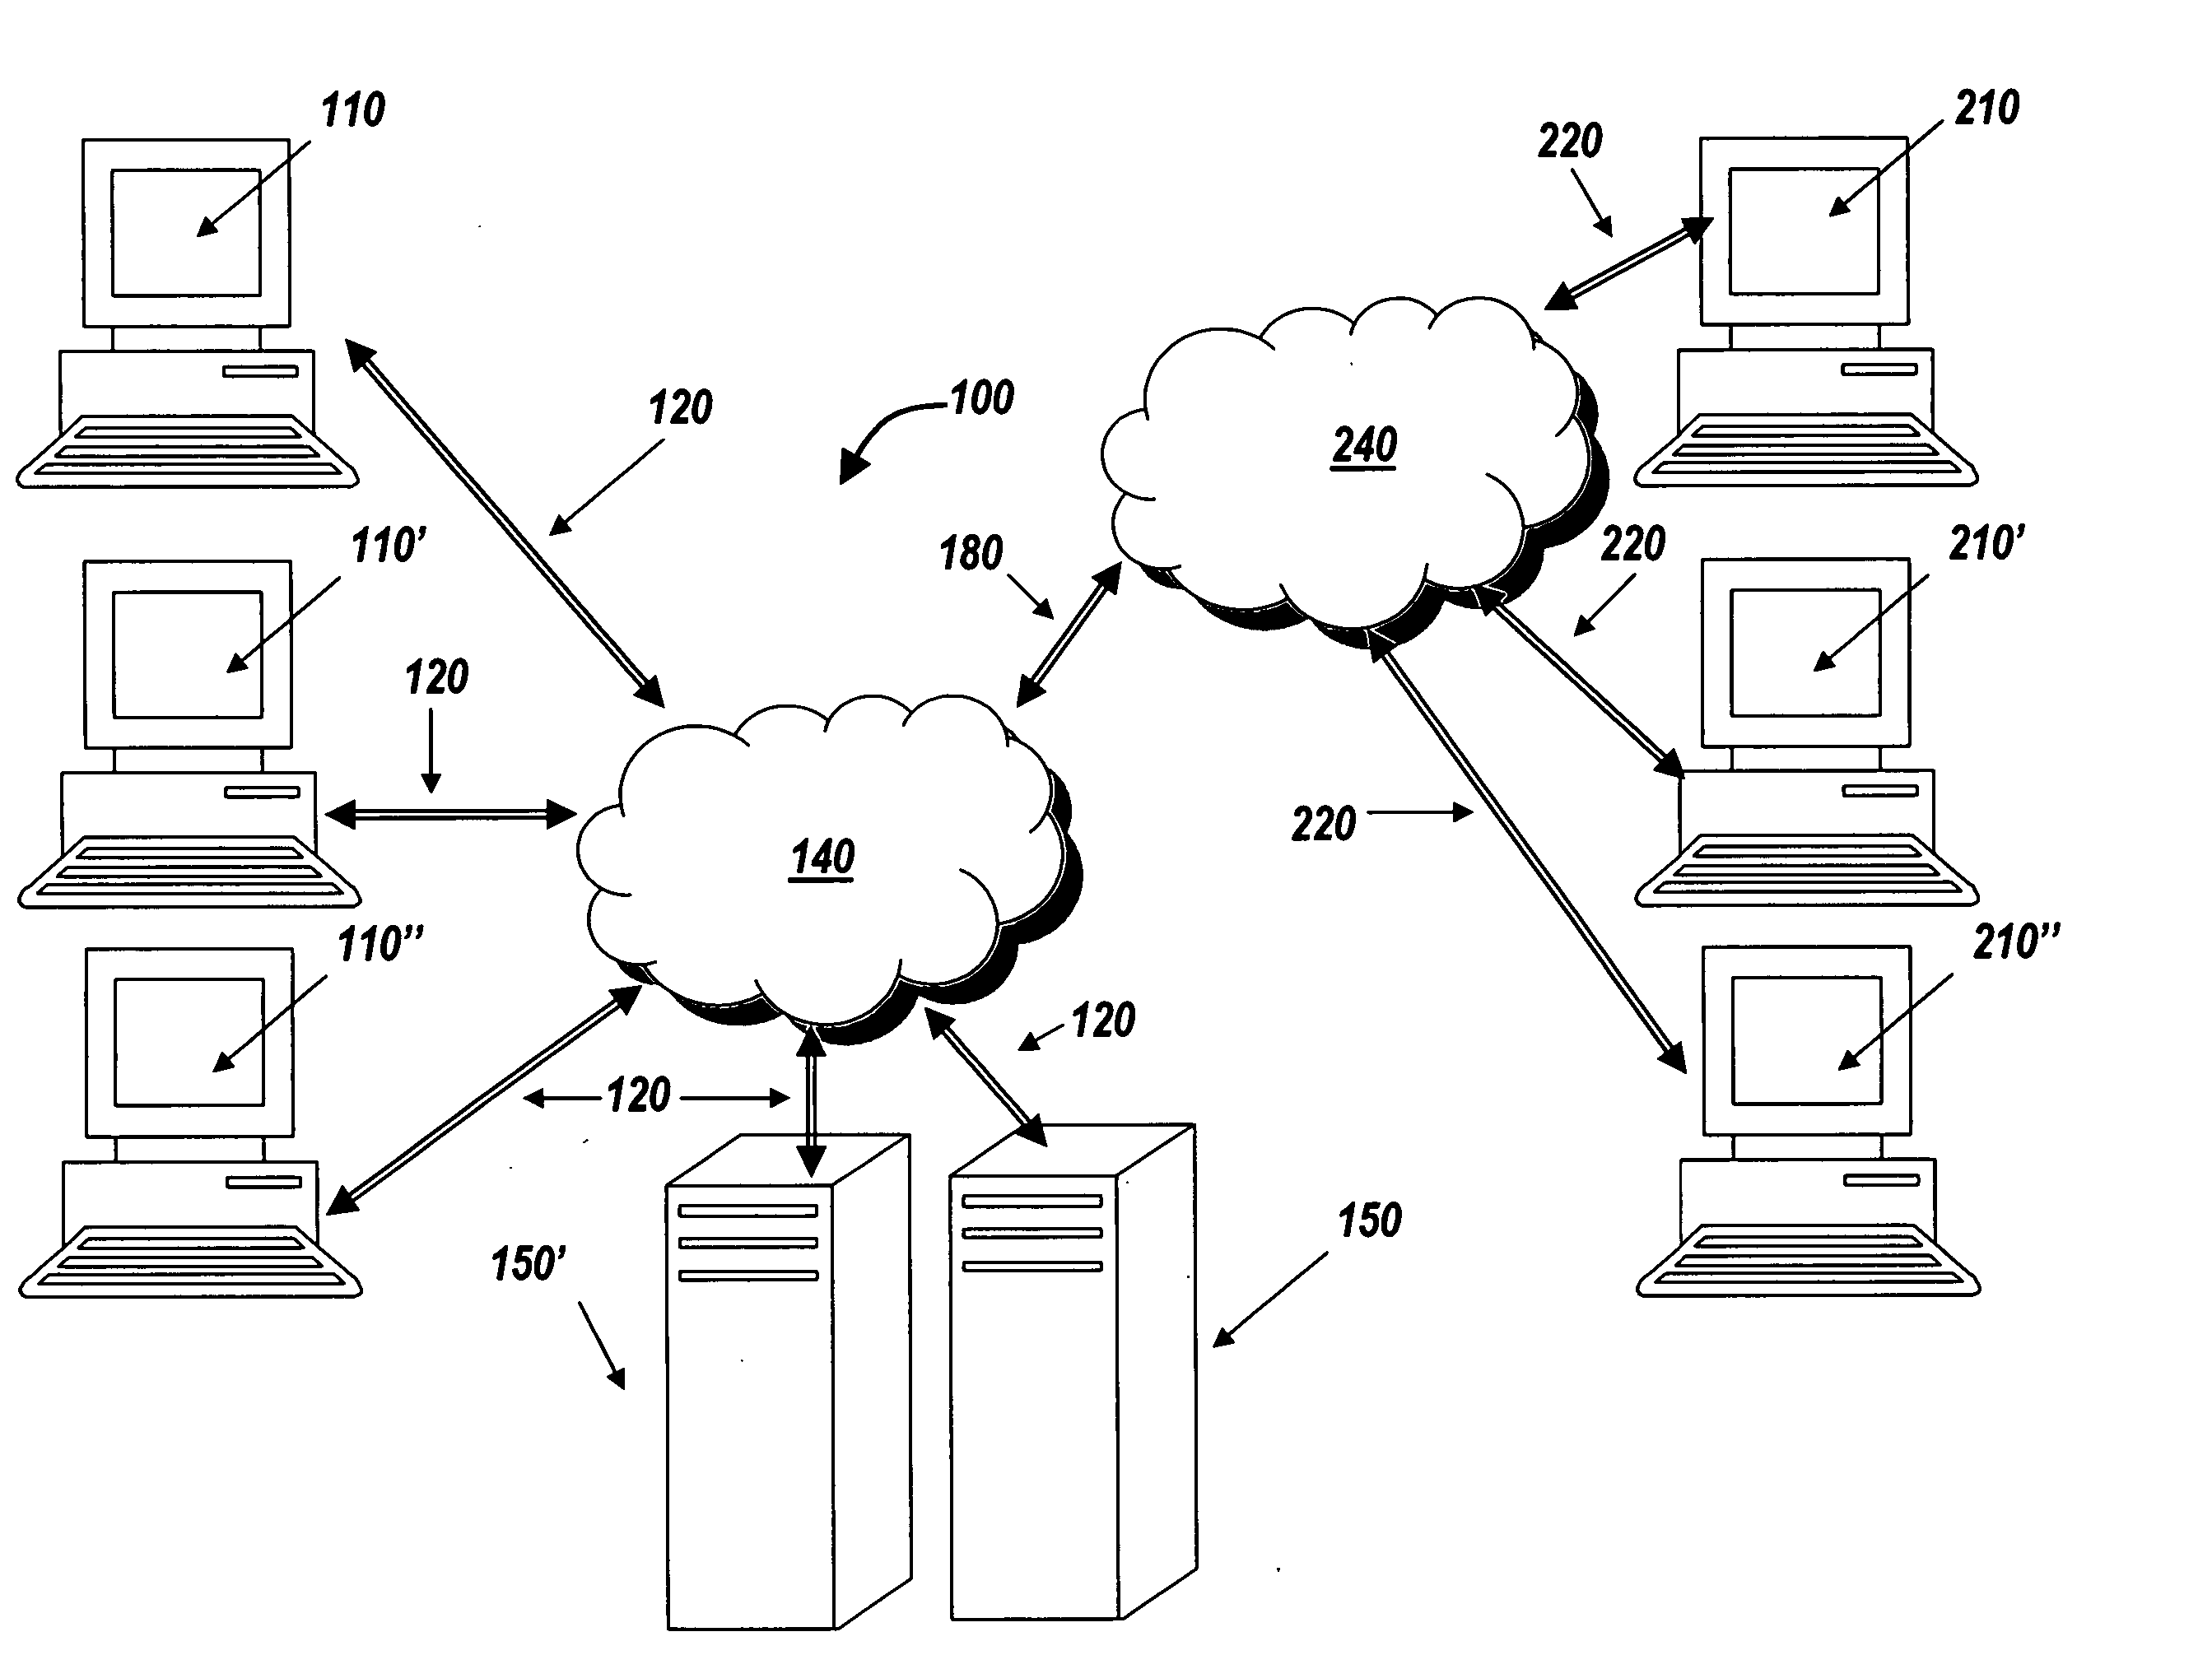 Systems and methods for dynamically adjusting a taxonomy used to categorize digital assets